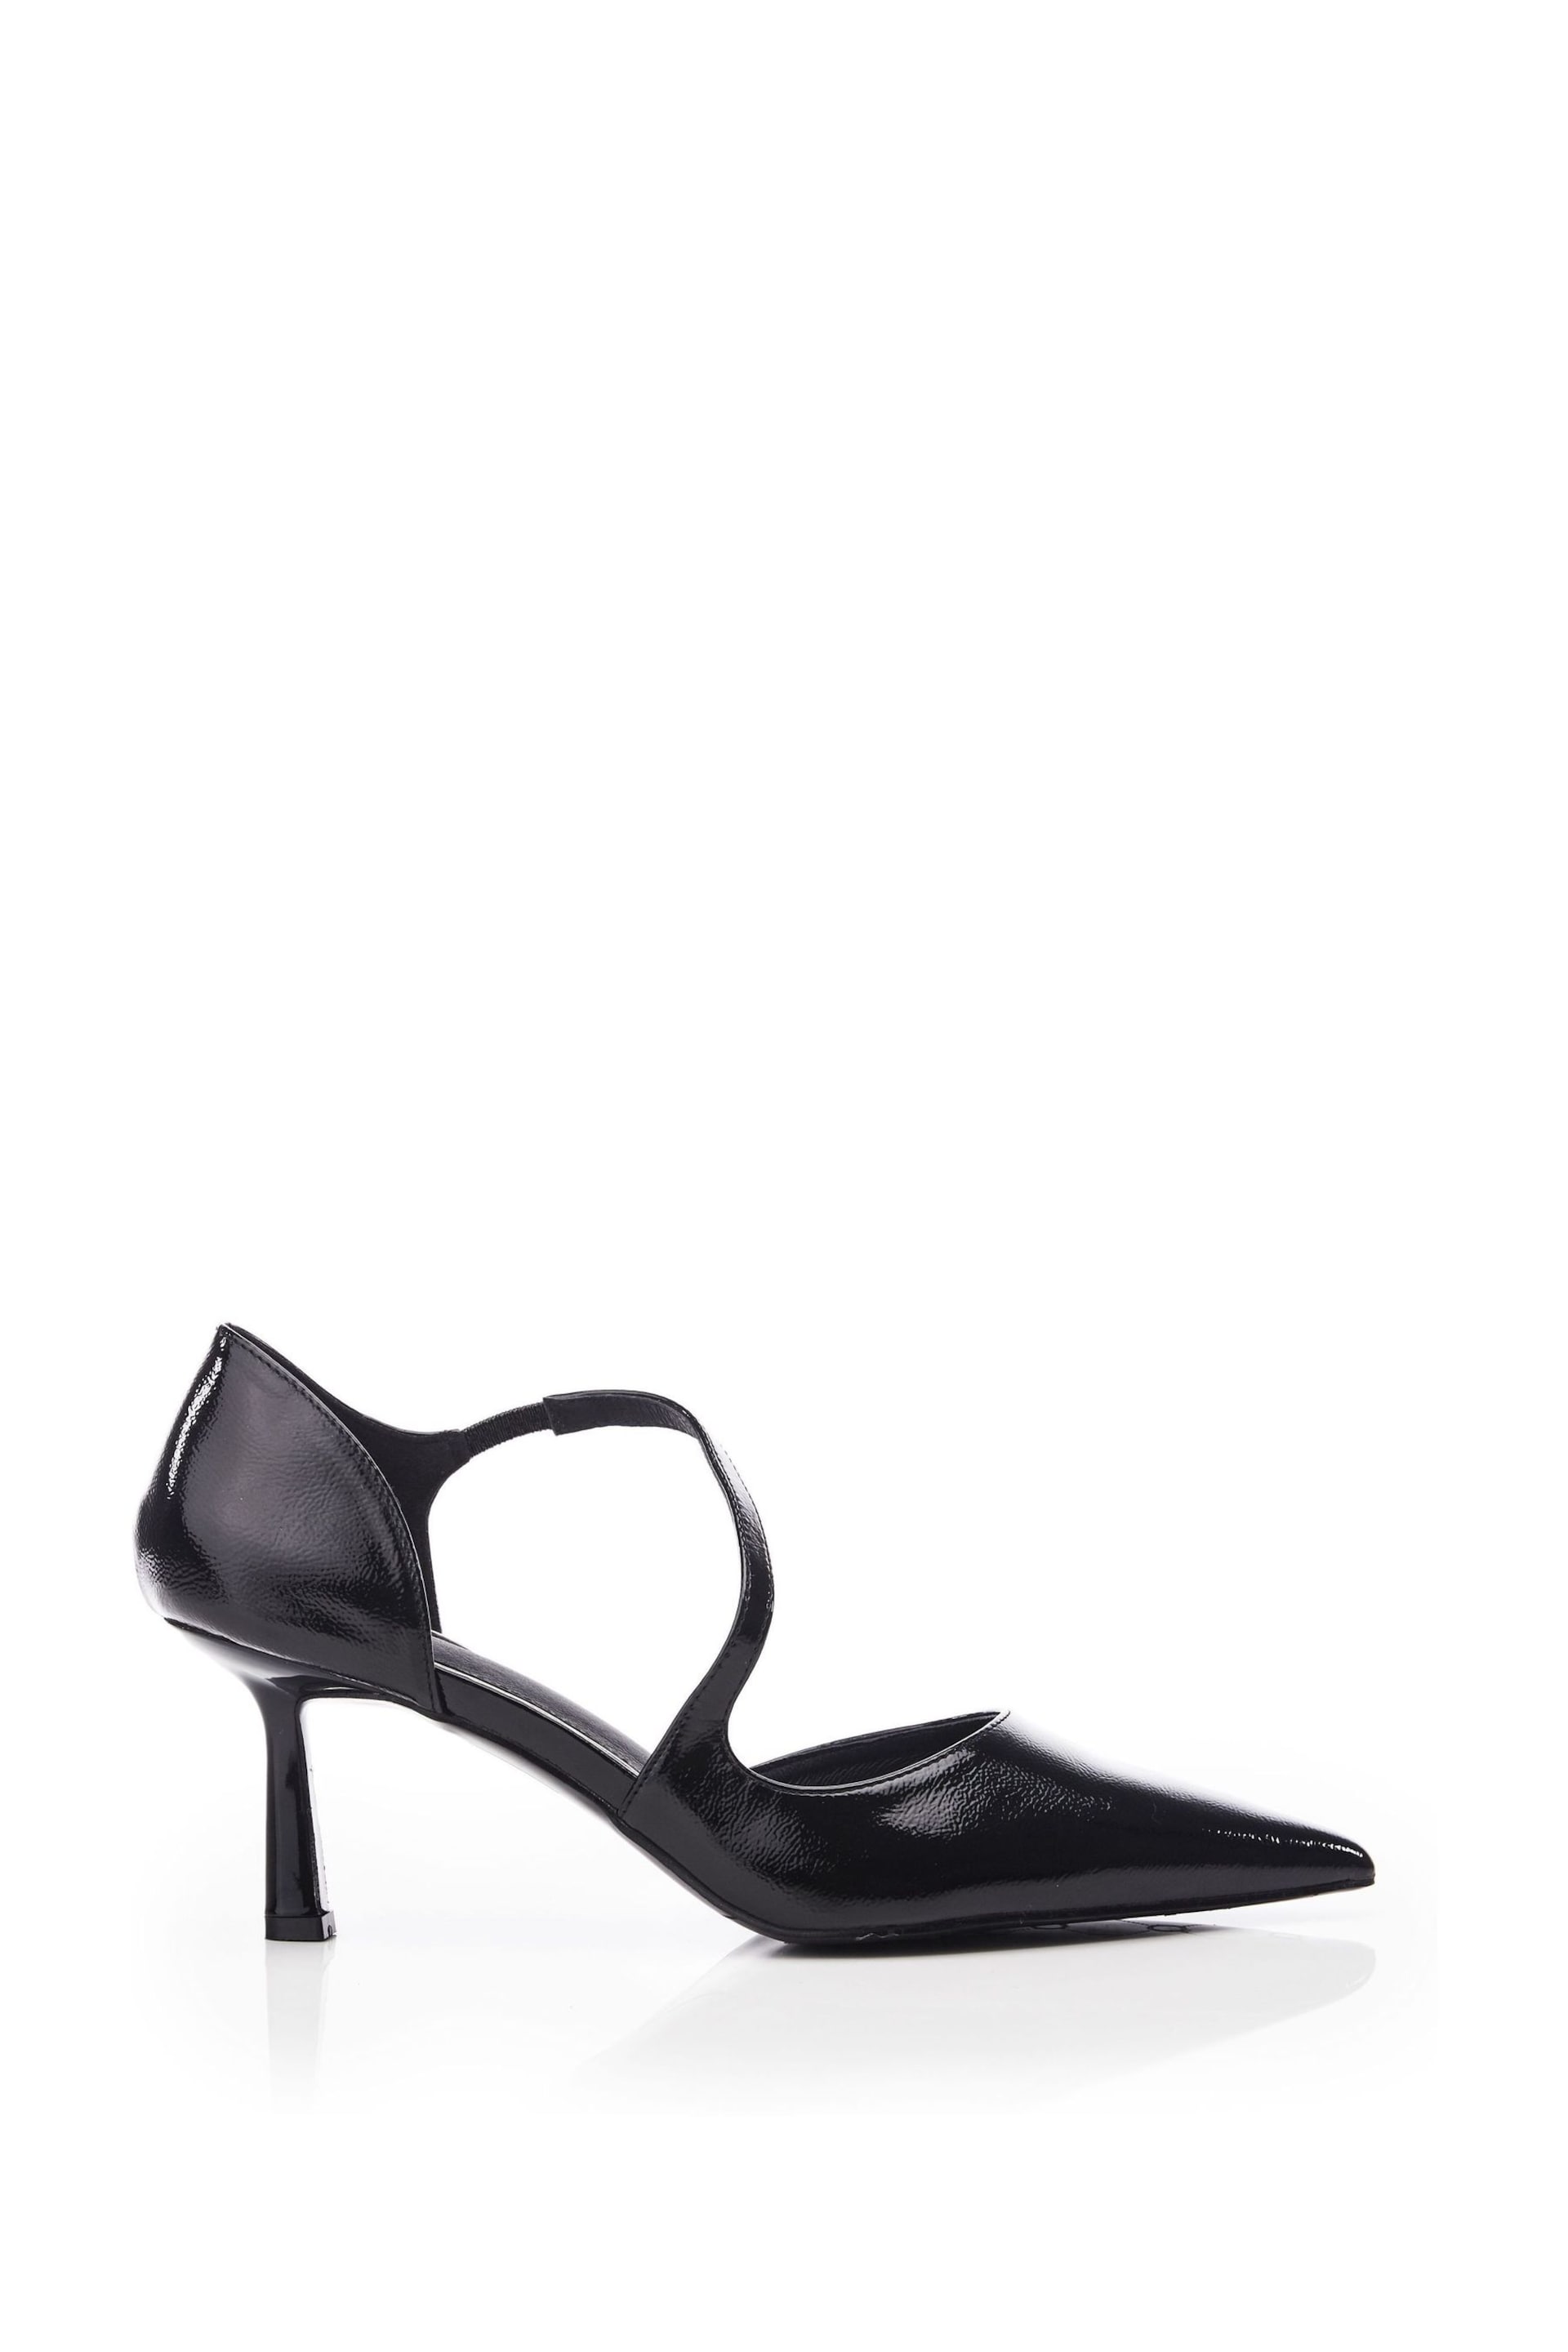 Moda in Pelle Daleiza Heeled Pointed Crossover Court Black Shoes - Image 1 of 4